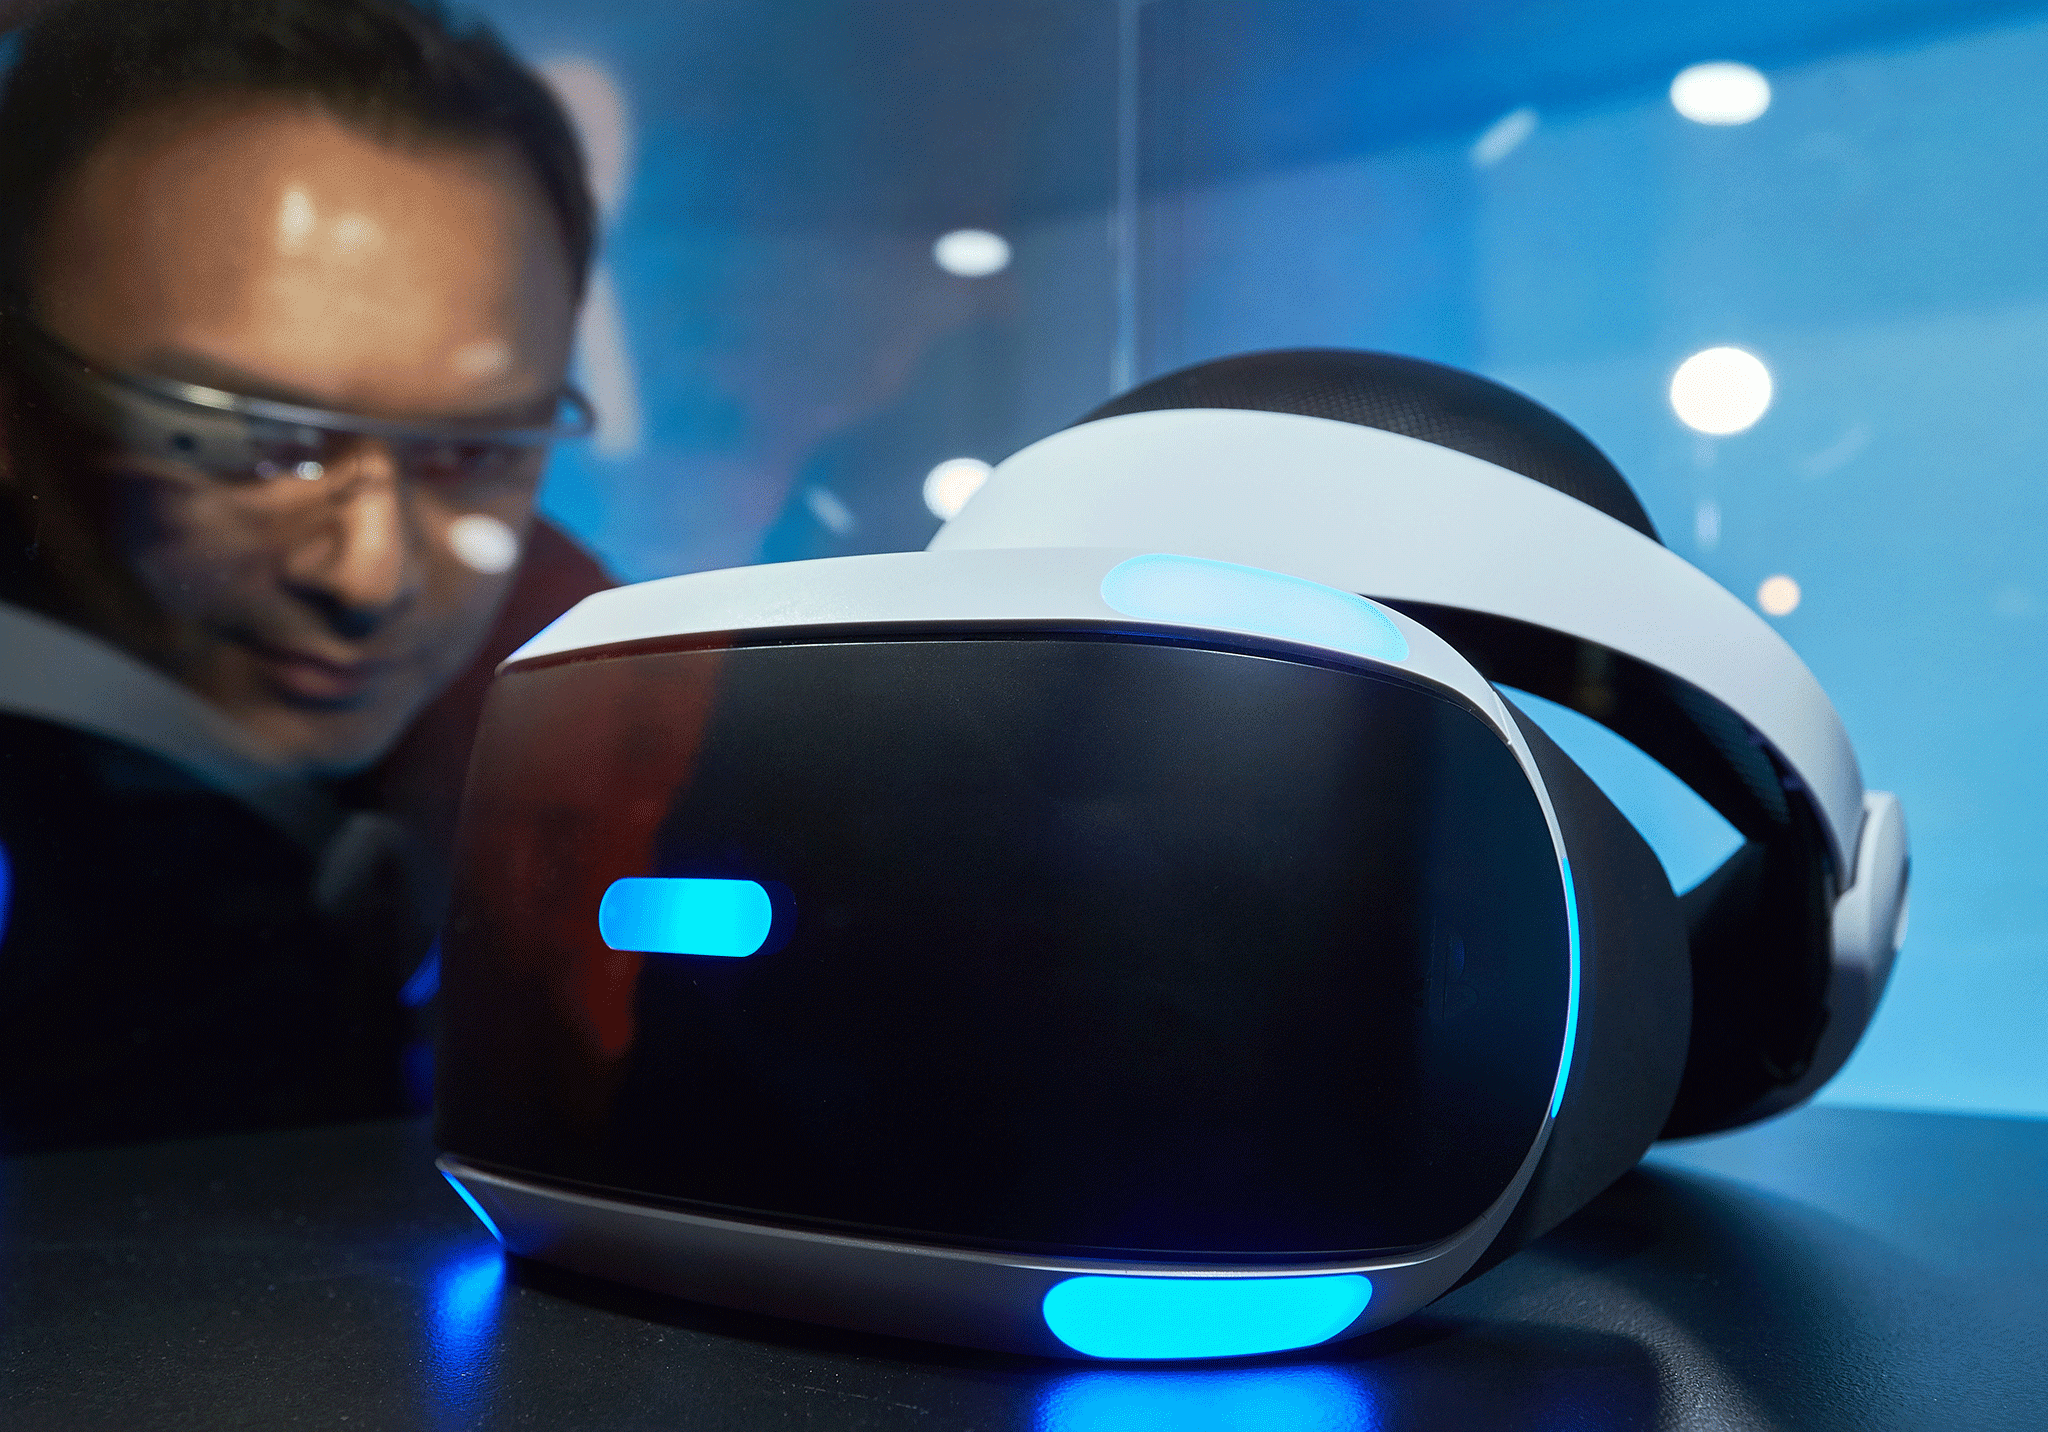 A gamer wearing Google Glass observes the Playstation VR virtual reality headset - Google is investing heavily in VR films